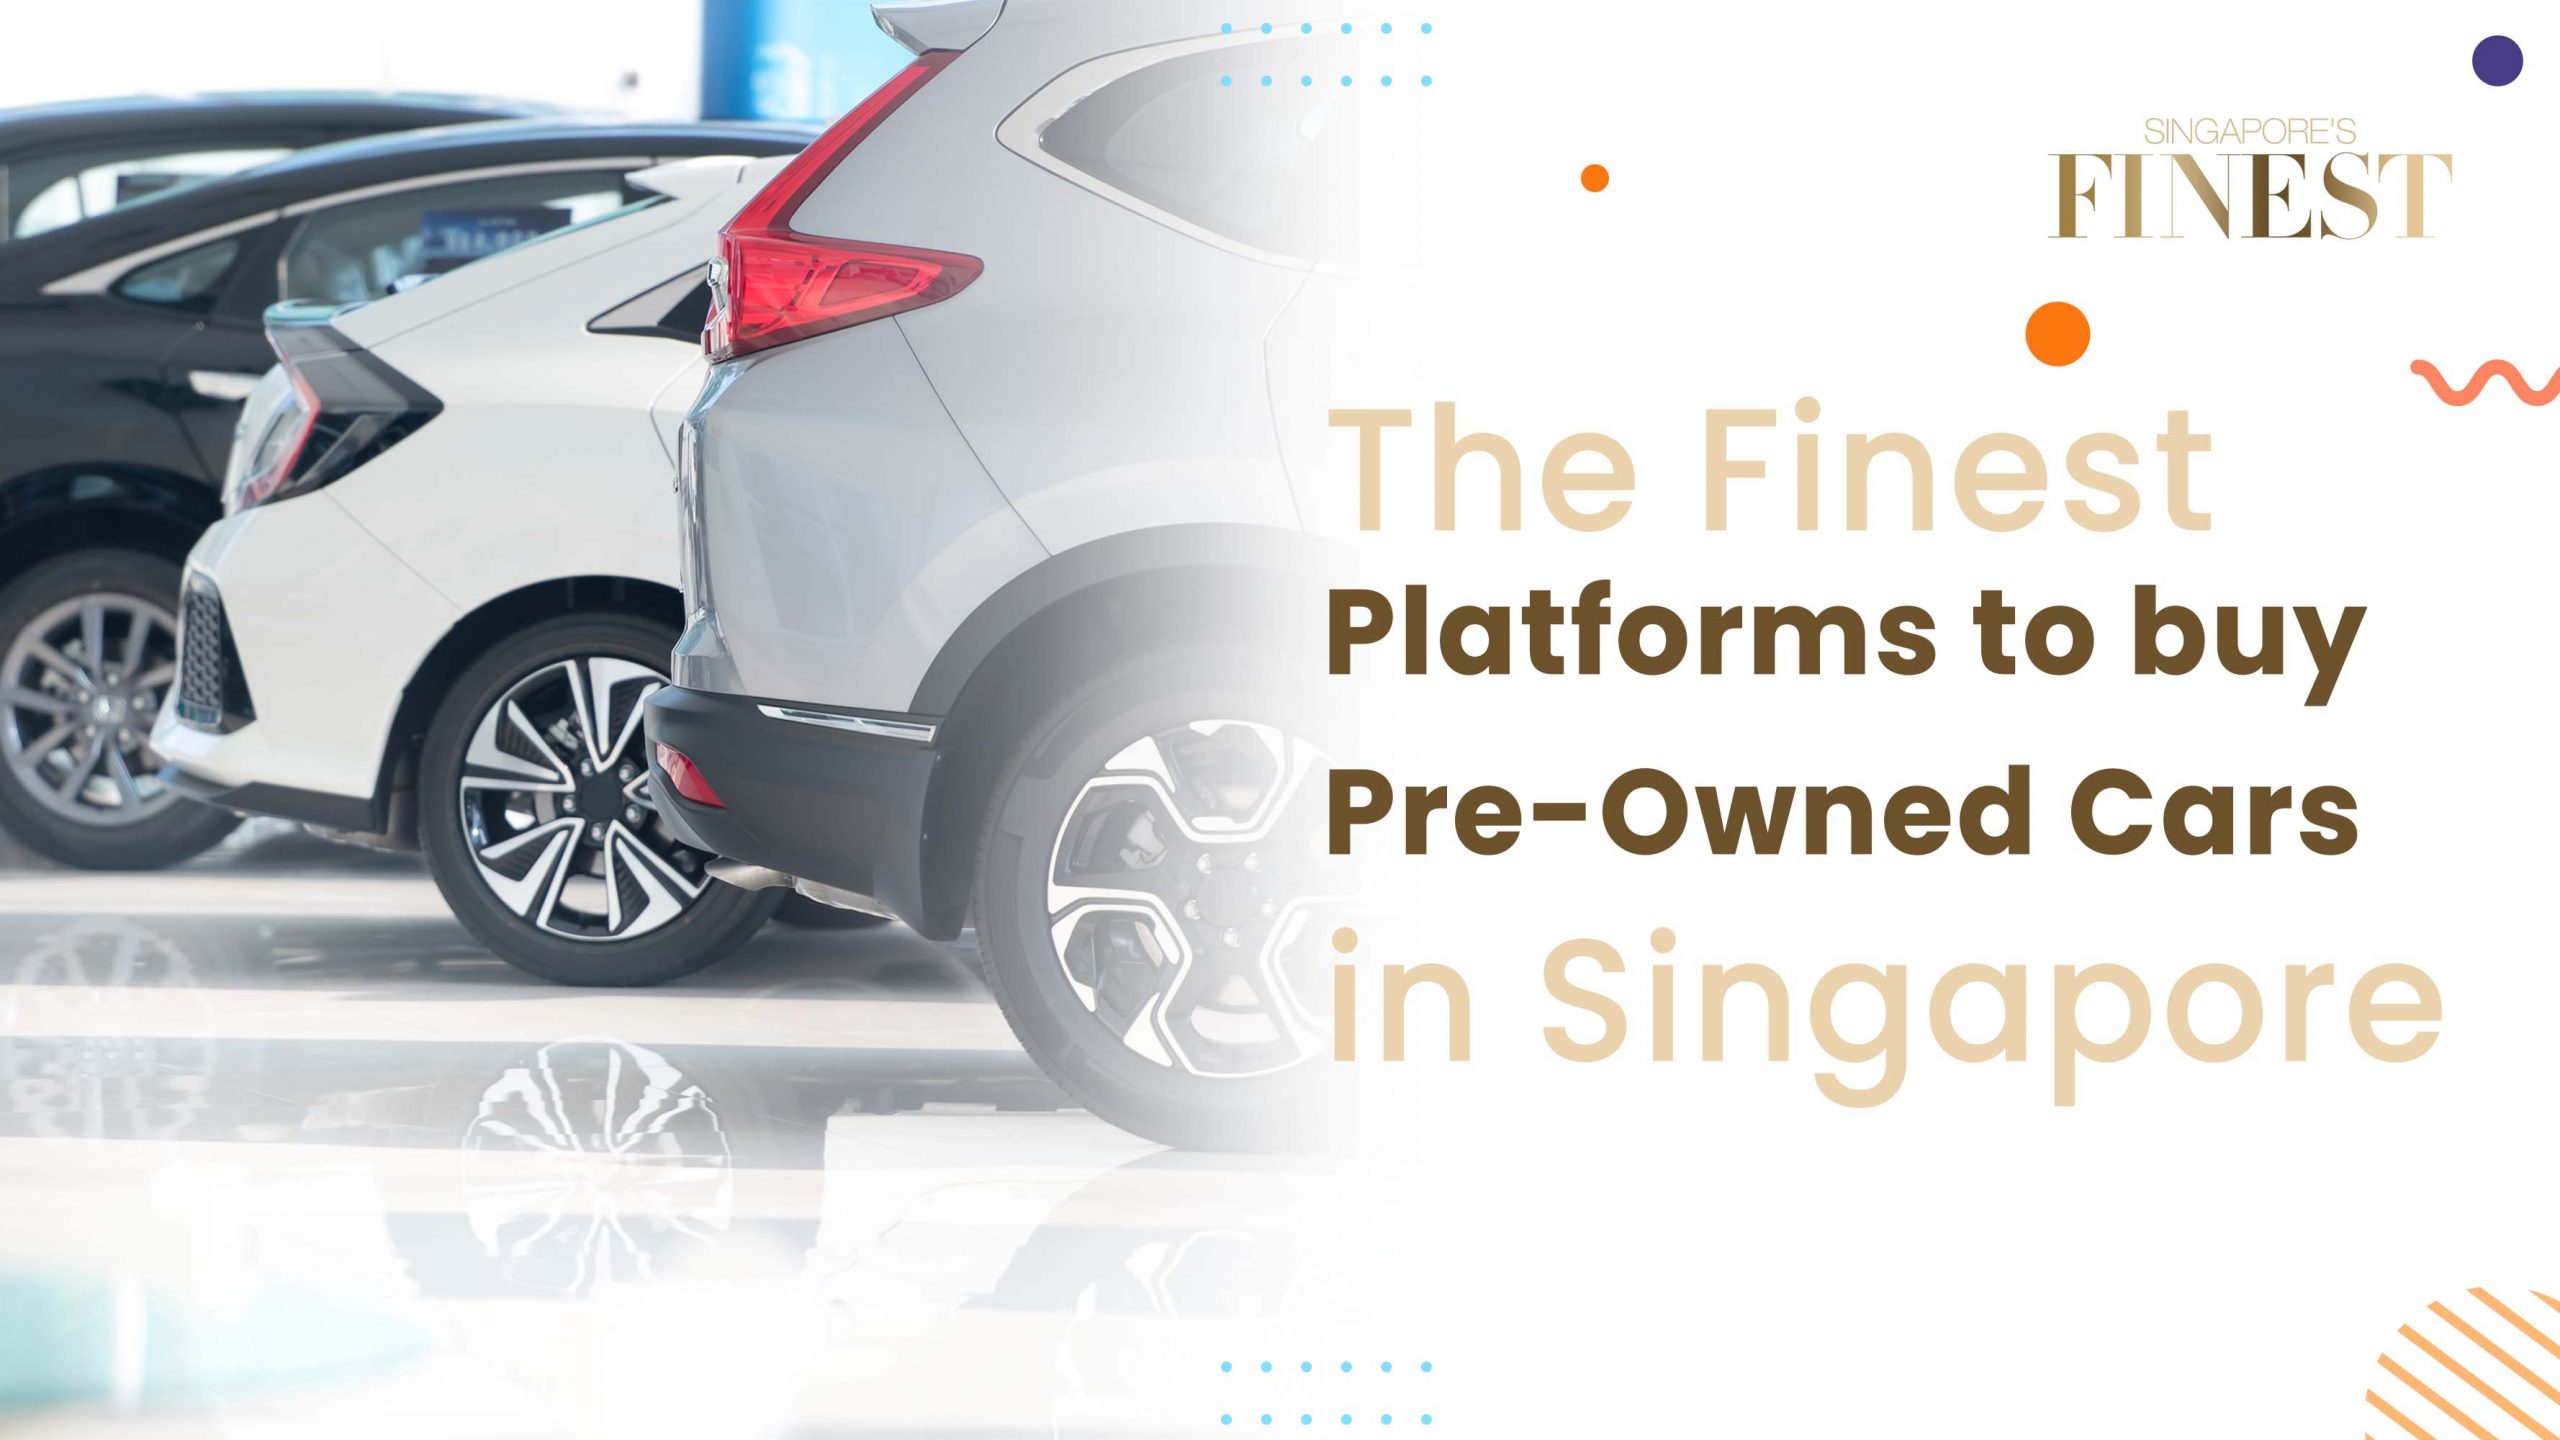 The Finest Platform to Buy Pre-Owned Cars in Singapore